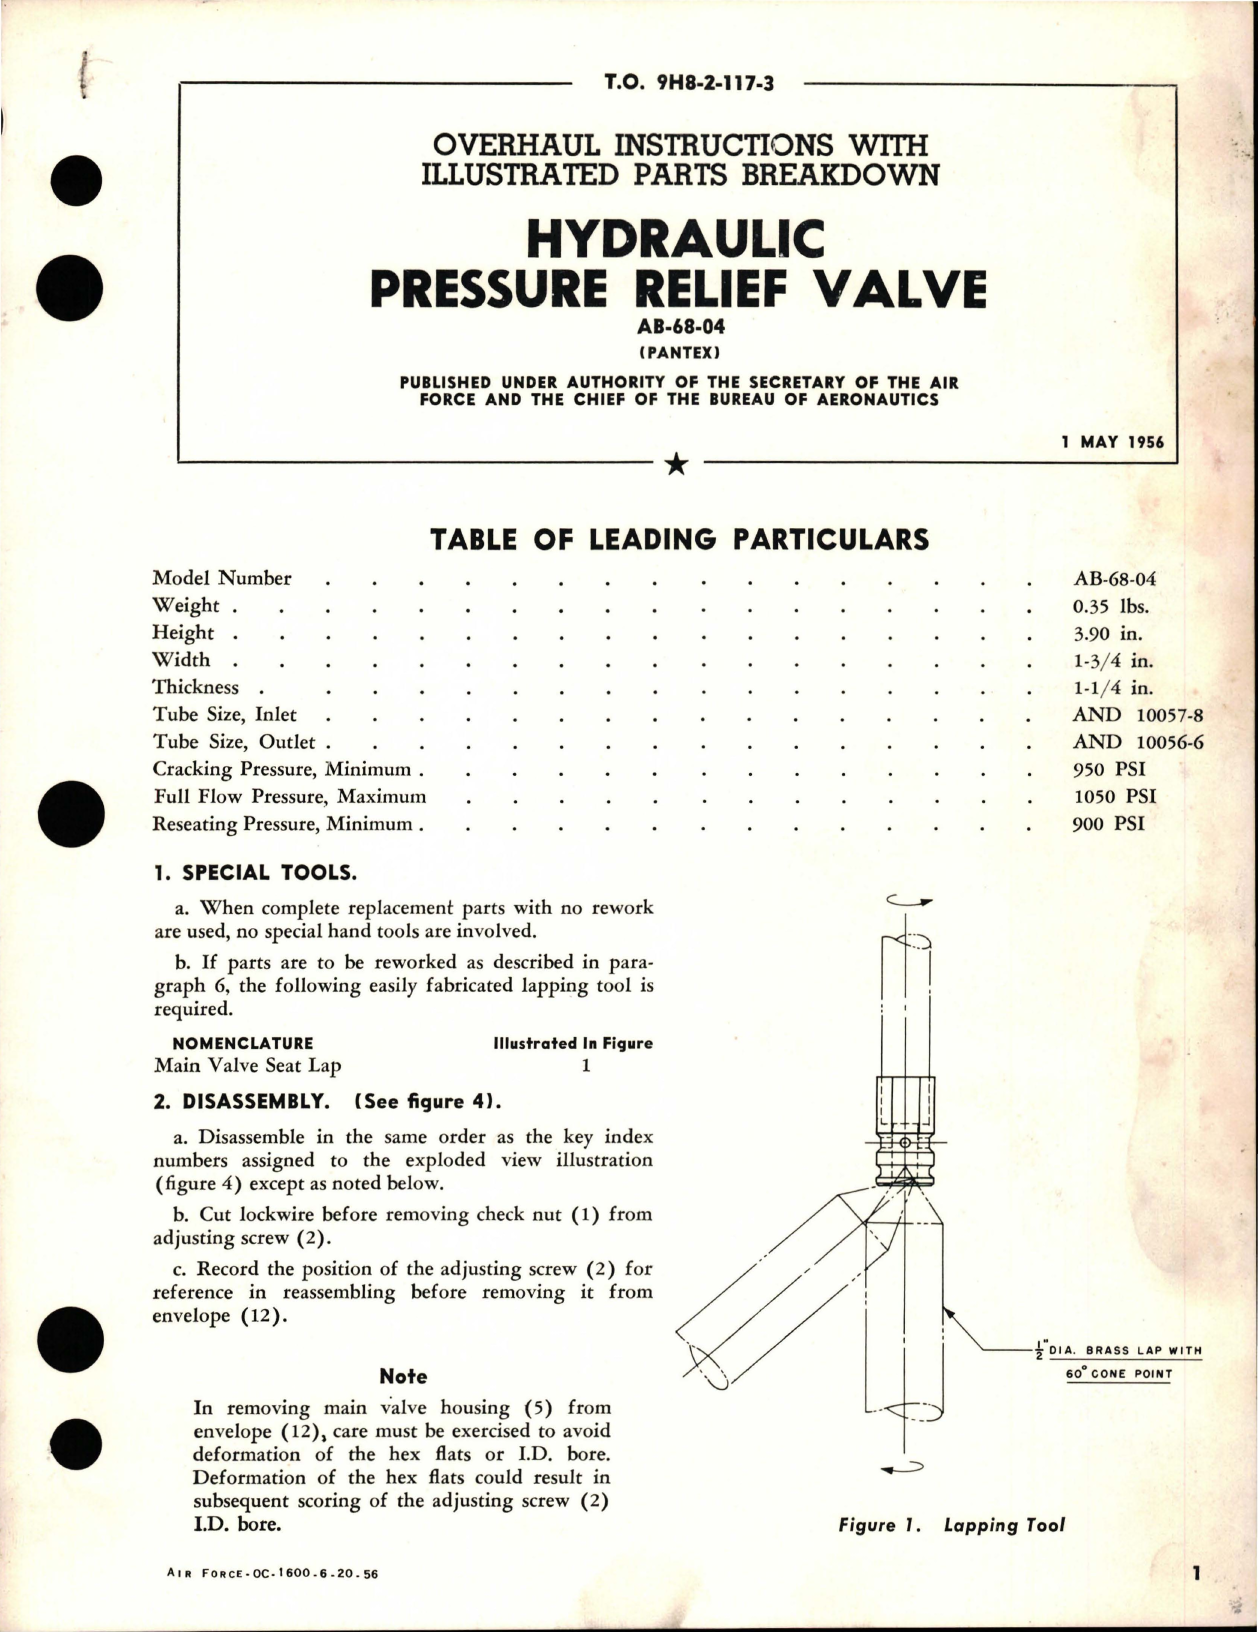 Sample page 1 from AirCorps Library document: Overhaul Instructions with Illustrated Parts Breakdown for Hydraulic Pressure Relief Valve - AB-68-04